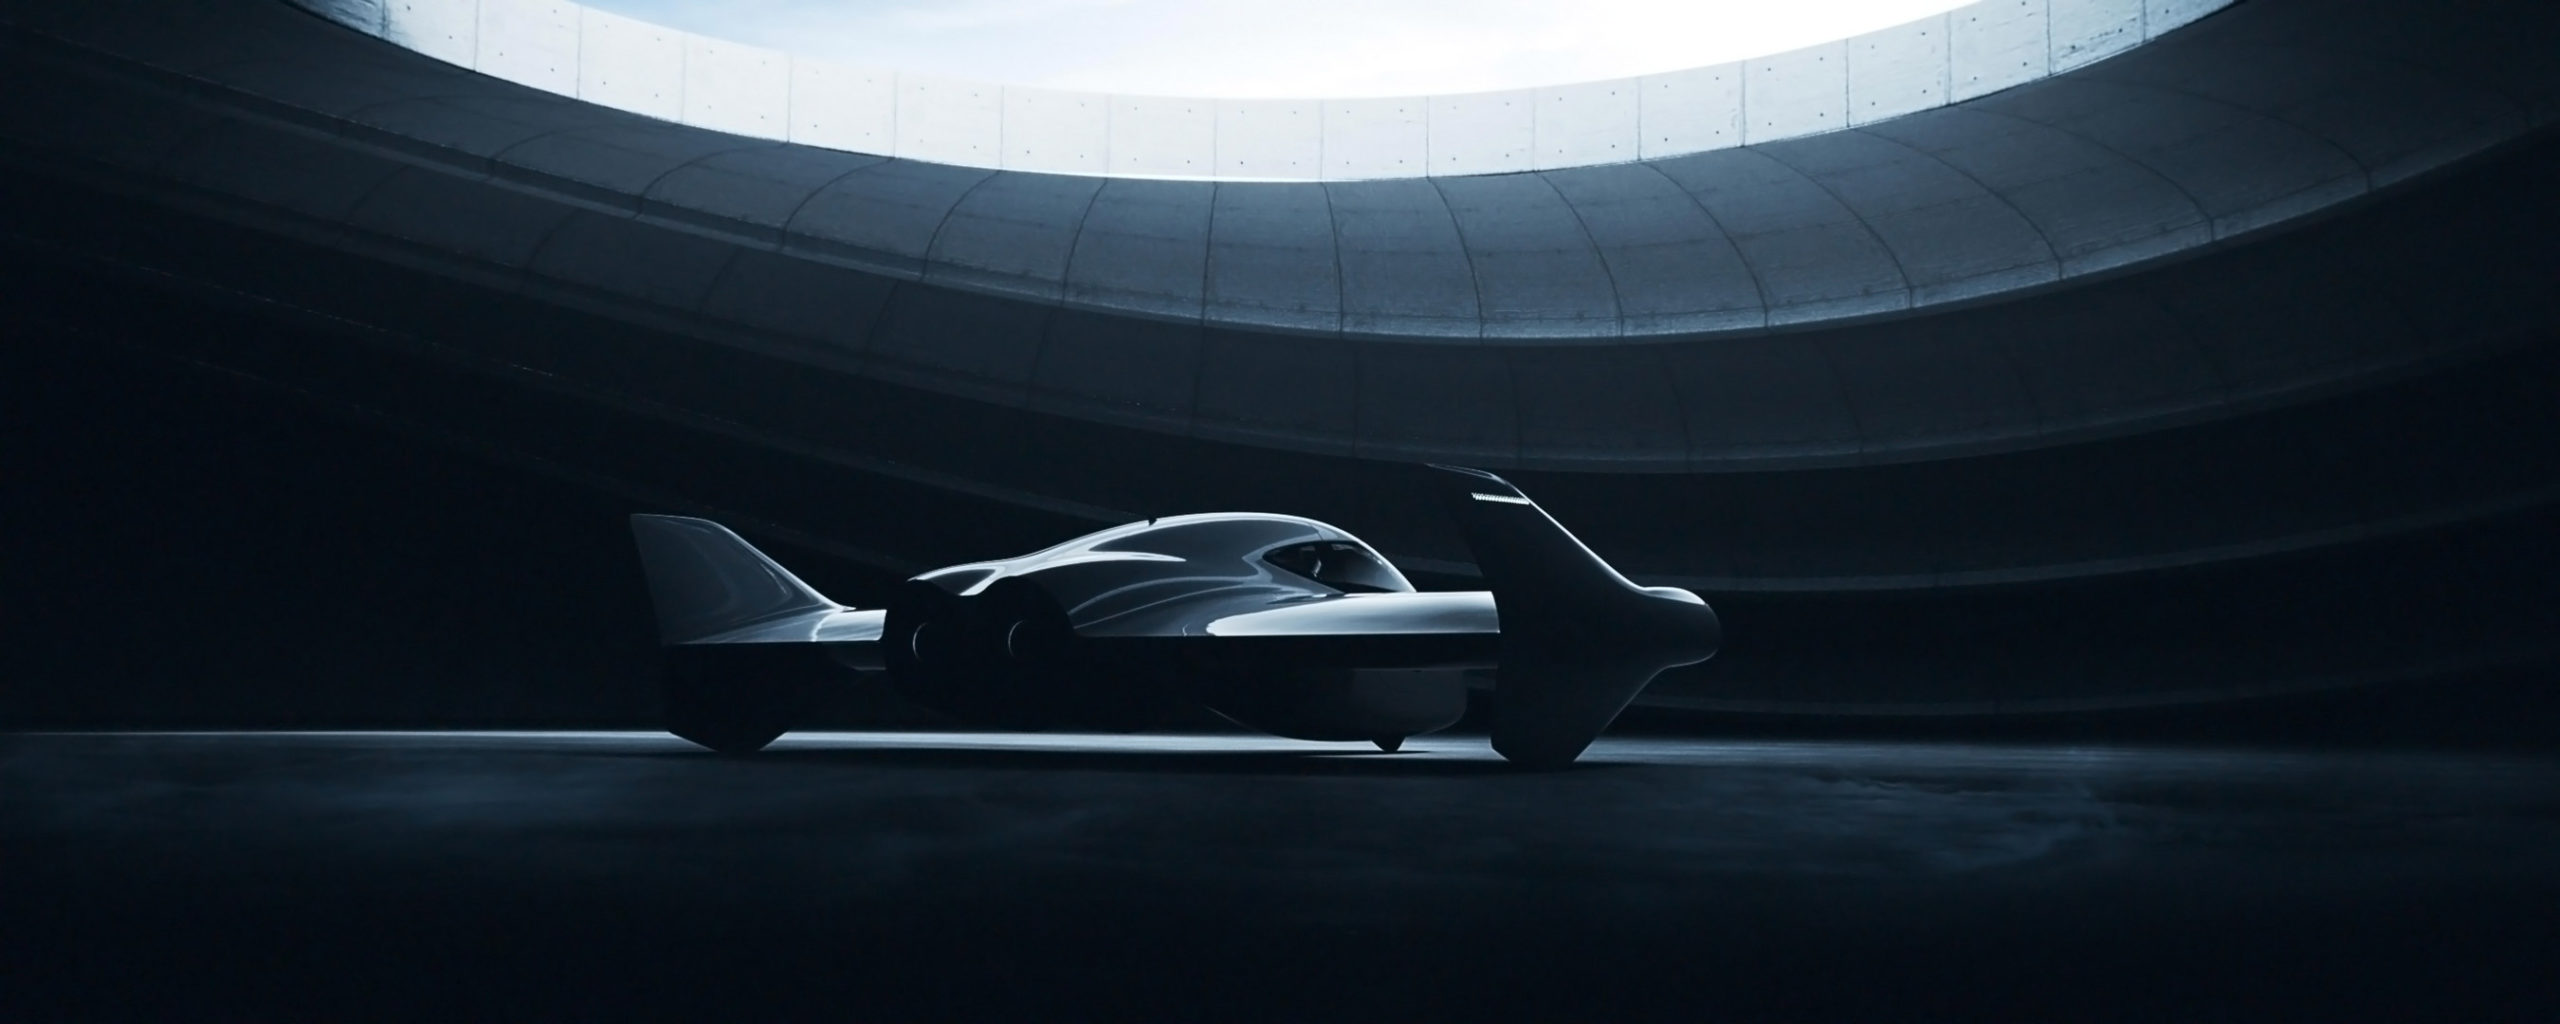 Porsche style could soon take off to provide premium personal air mobility